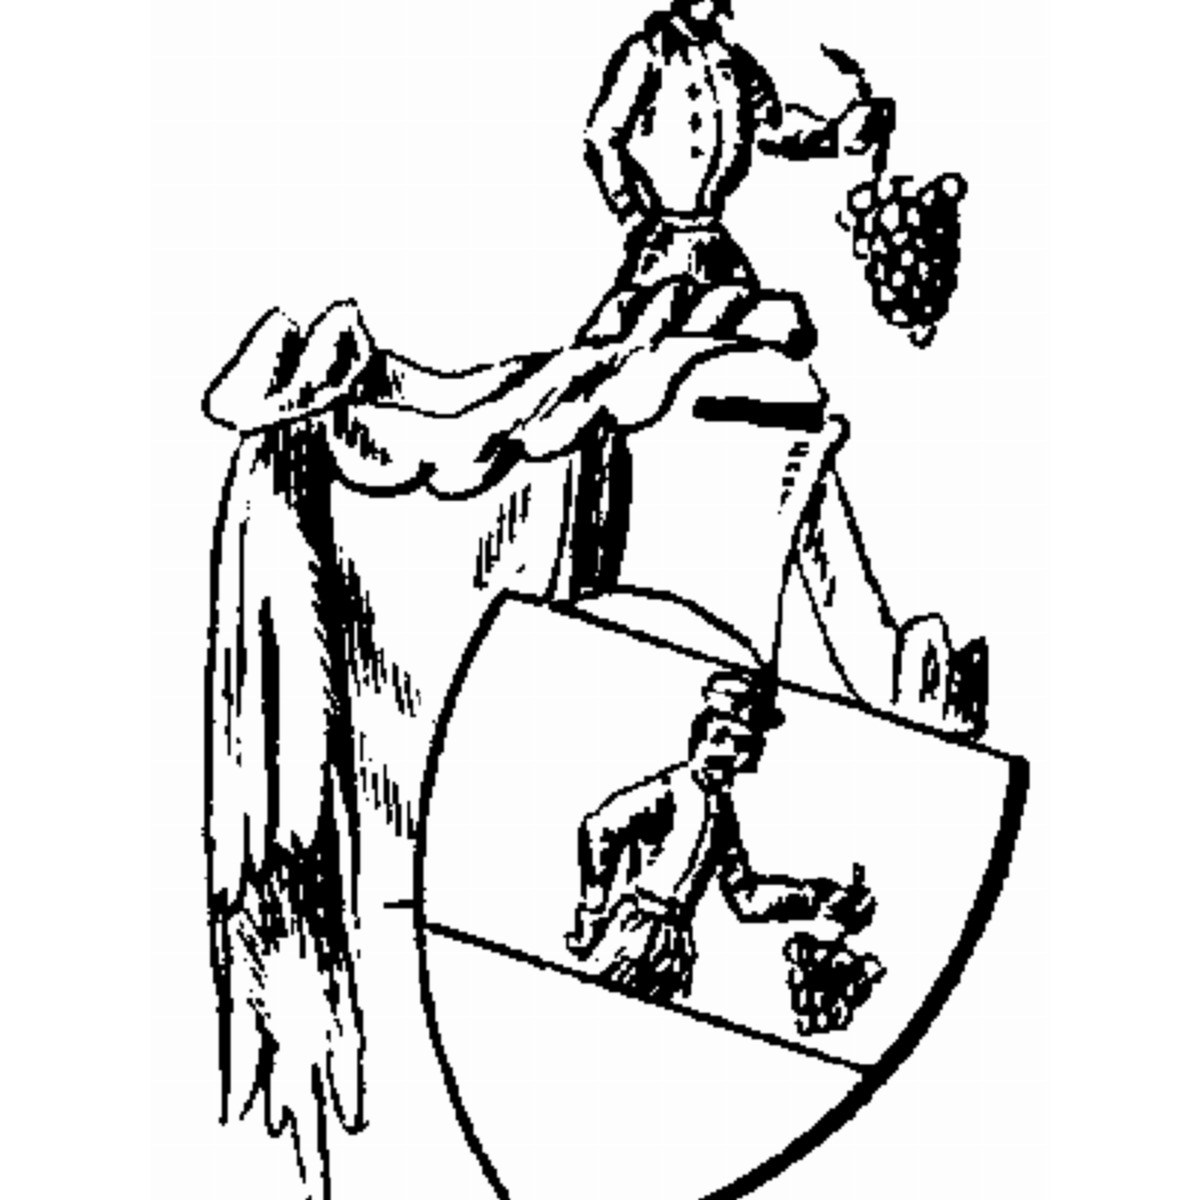 Coat of arms of family Caro